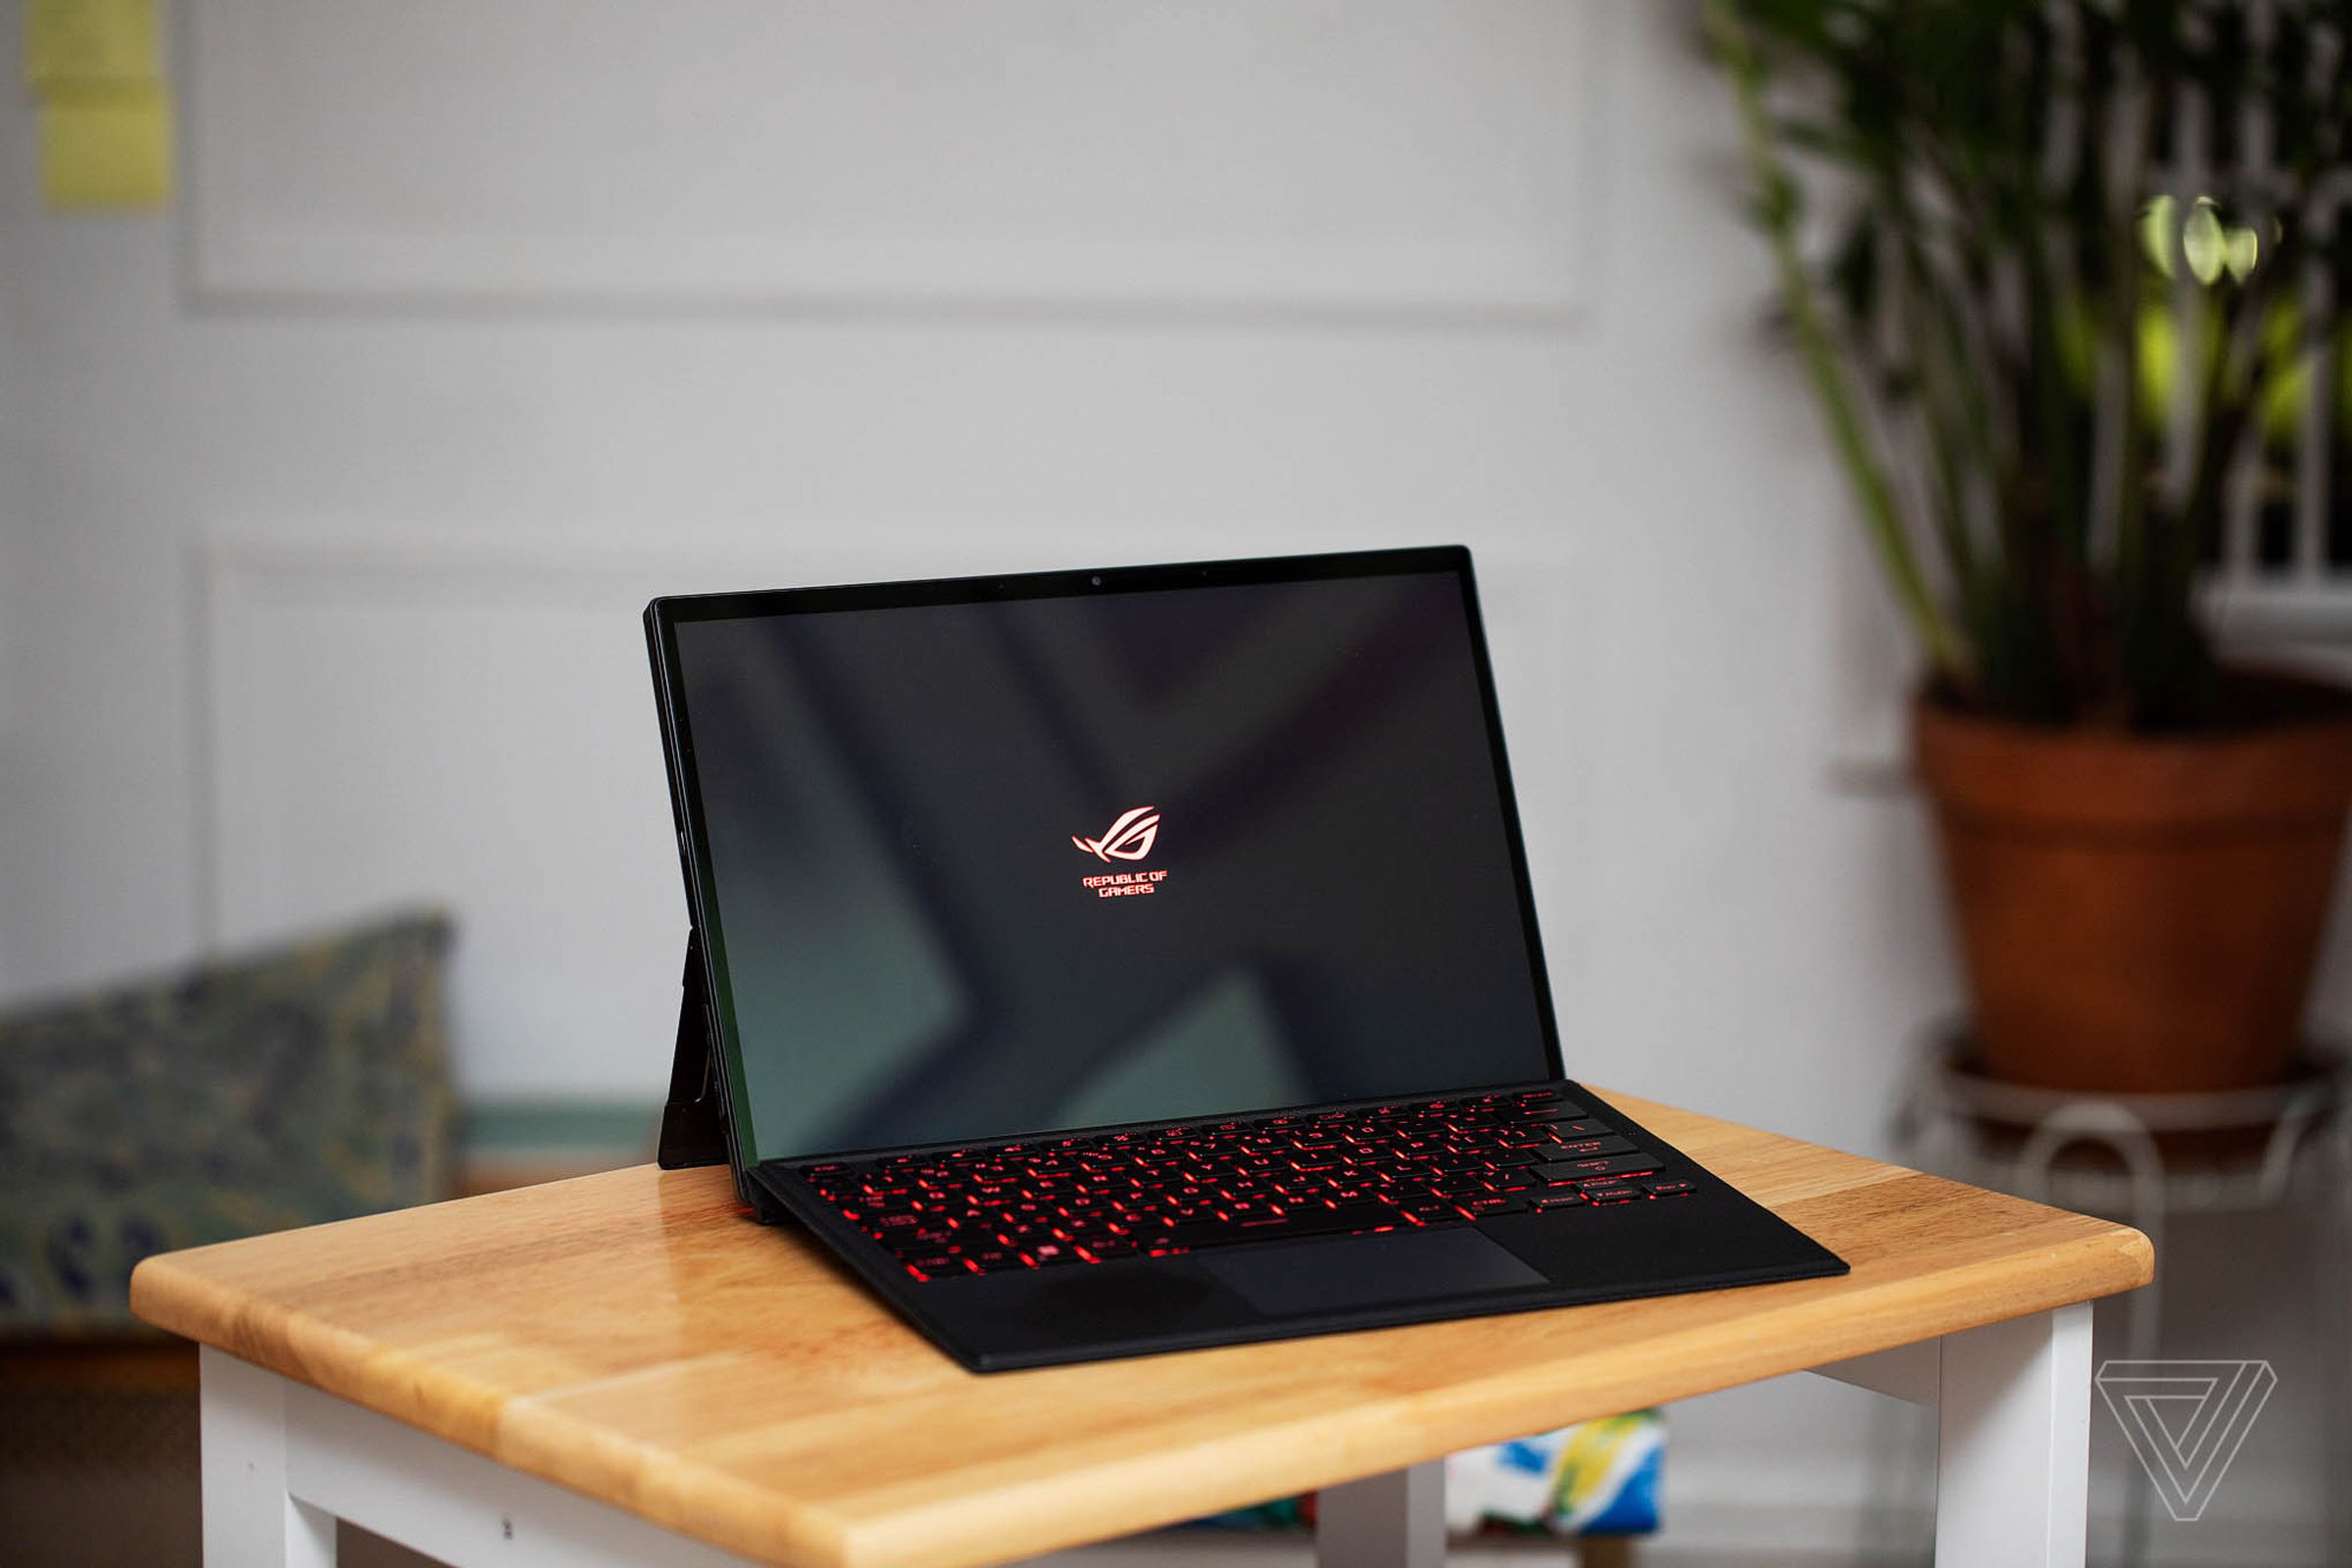 The Asus ROG Flow Z13 in laptop mode on a small table. The screen displays the ROG logo.